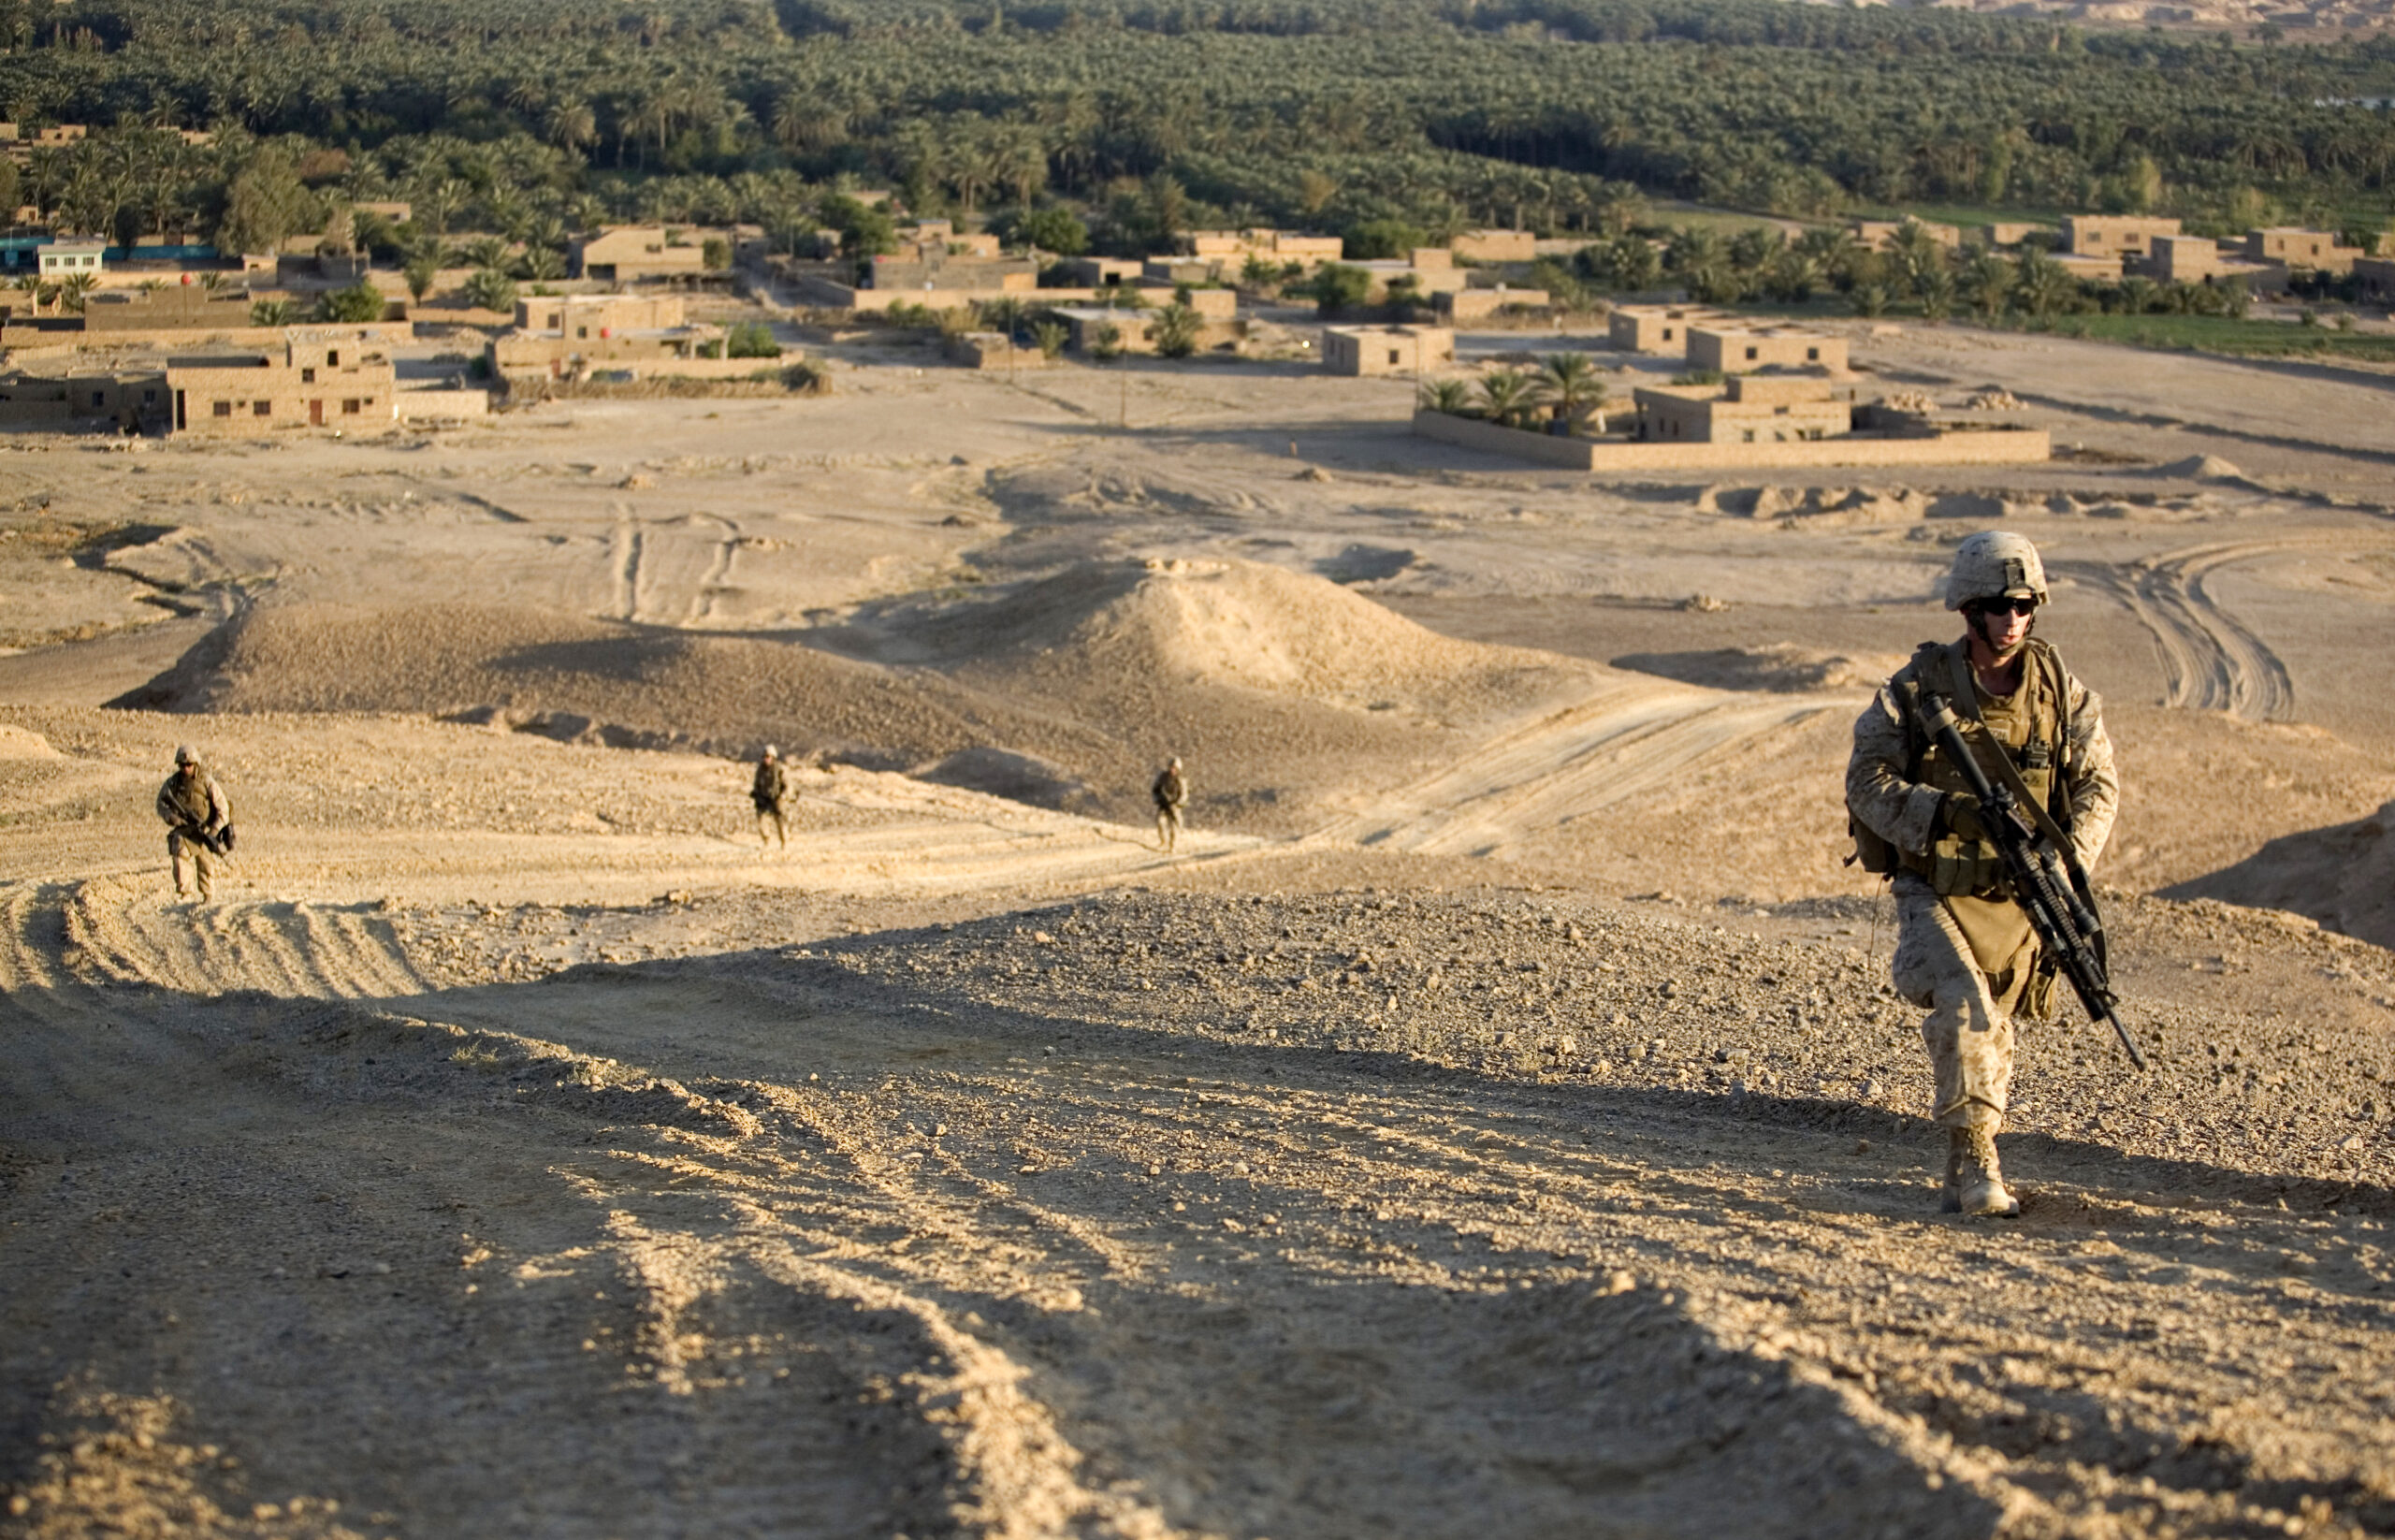 U.S. Marines from 1st Platoon, Alpha Company, 1st Battalion, 7th Marine Regiment patrol from Expeditionary Patrol Base Dulab to a ridge along the outskirts of Dulab, Iraq, Sept. 26, 2007. The Marines are working with Iraqi police in support of Operation Iraqi Freedom in the Al Anbar province of Iraq. (U.S. Marine Corps photo by Cpl. Shane S. Keller) (Released)